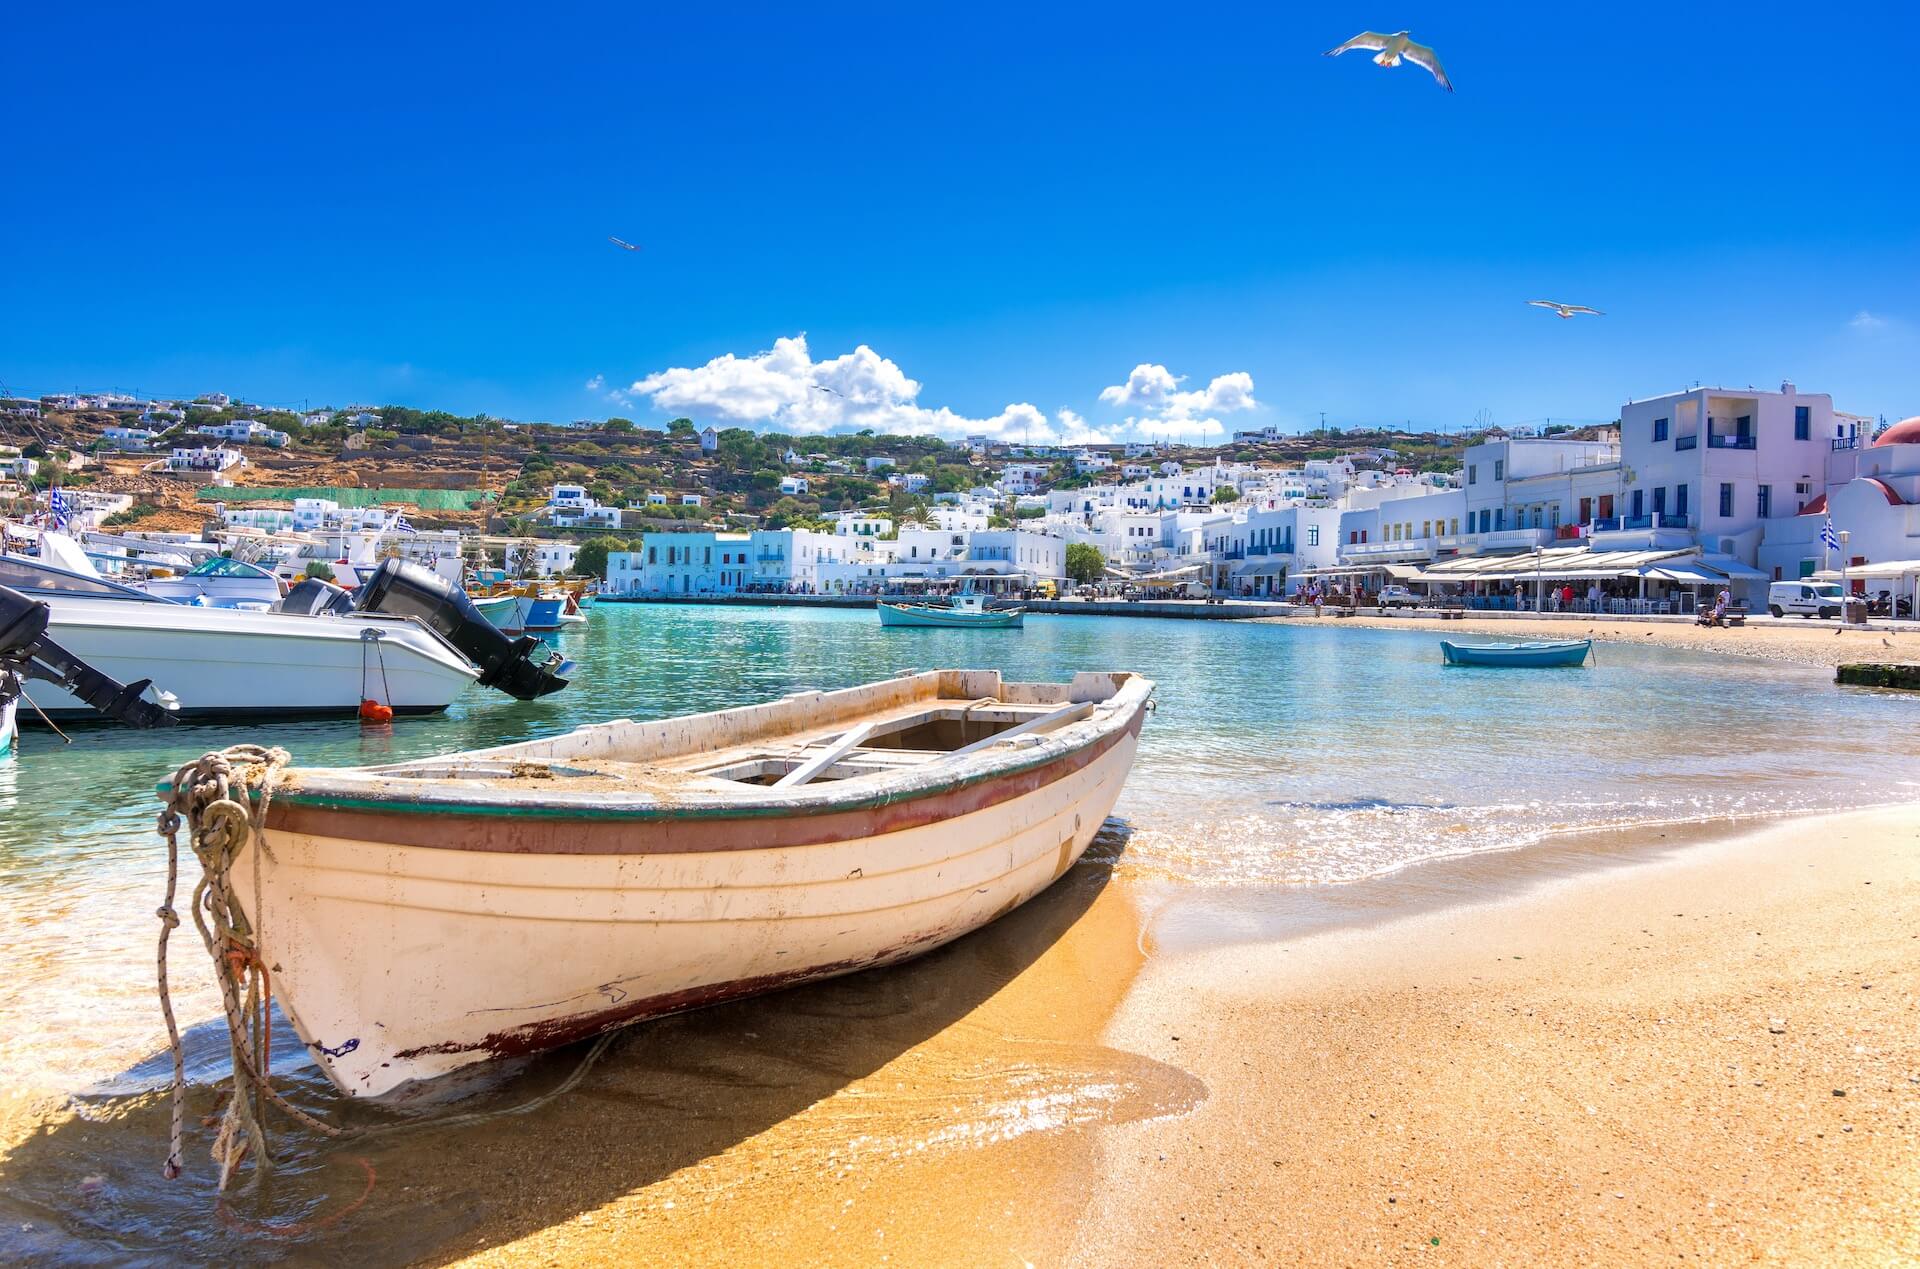 Boats on the coast of Mykonos, and the town in the distance